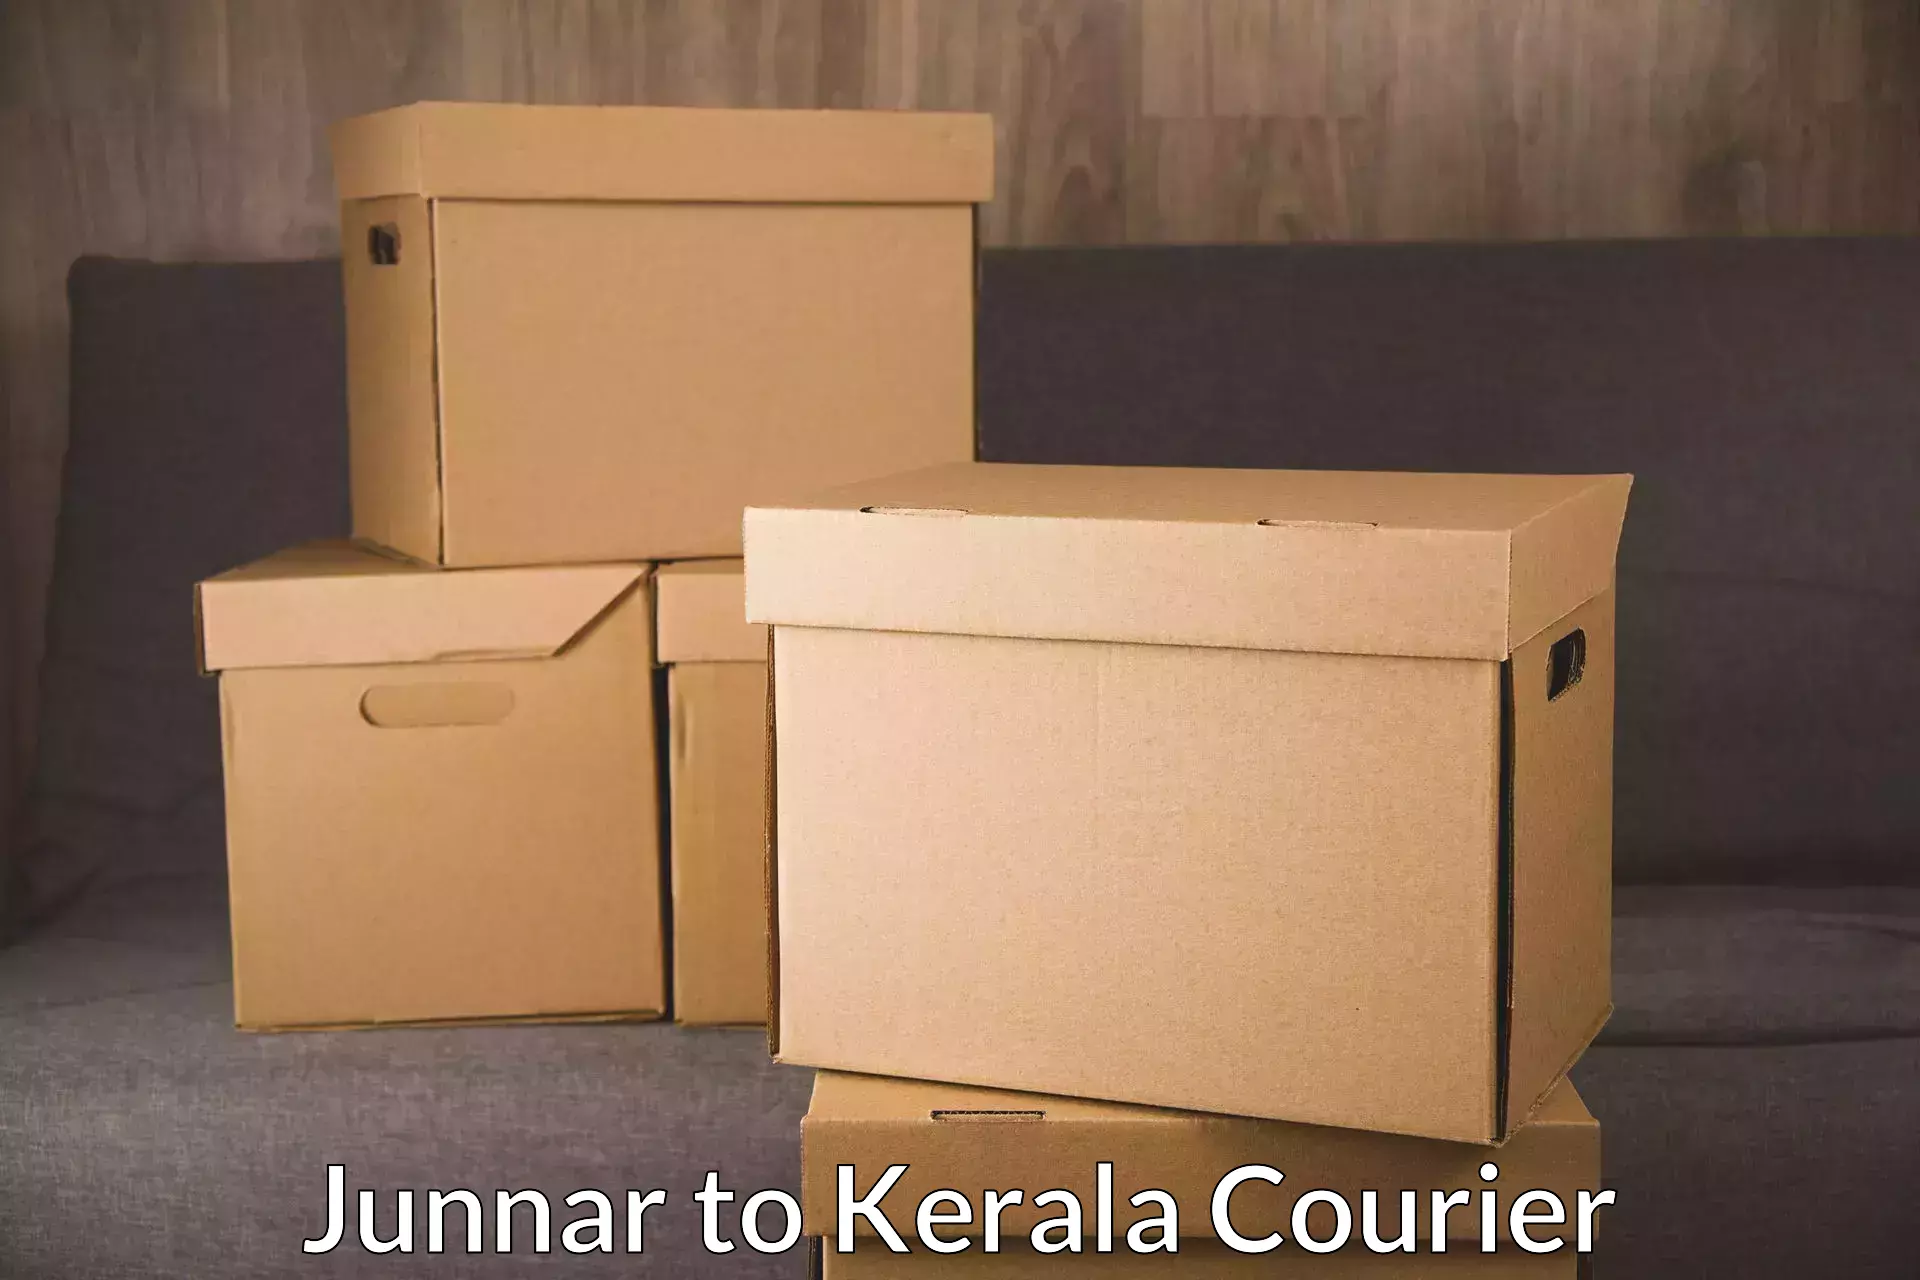 Package delivery network Junnar to Shoranur